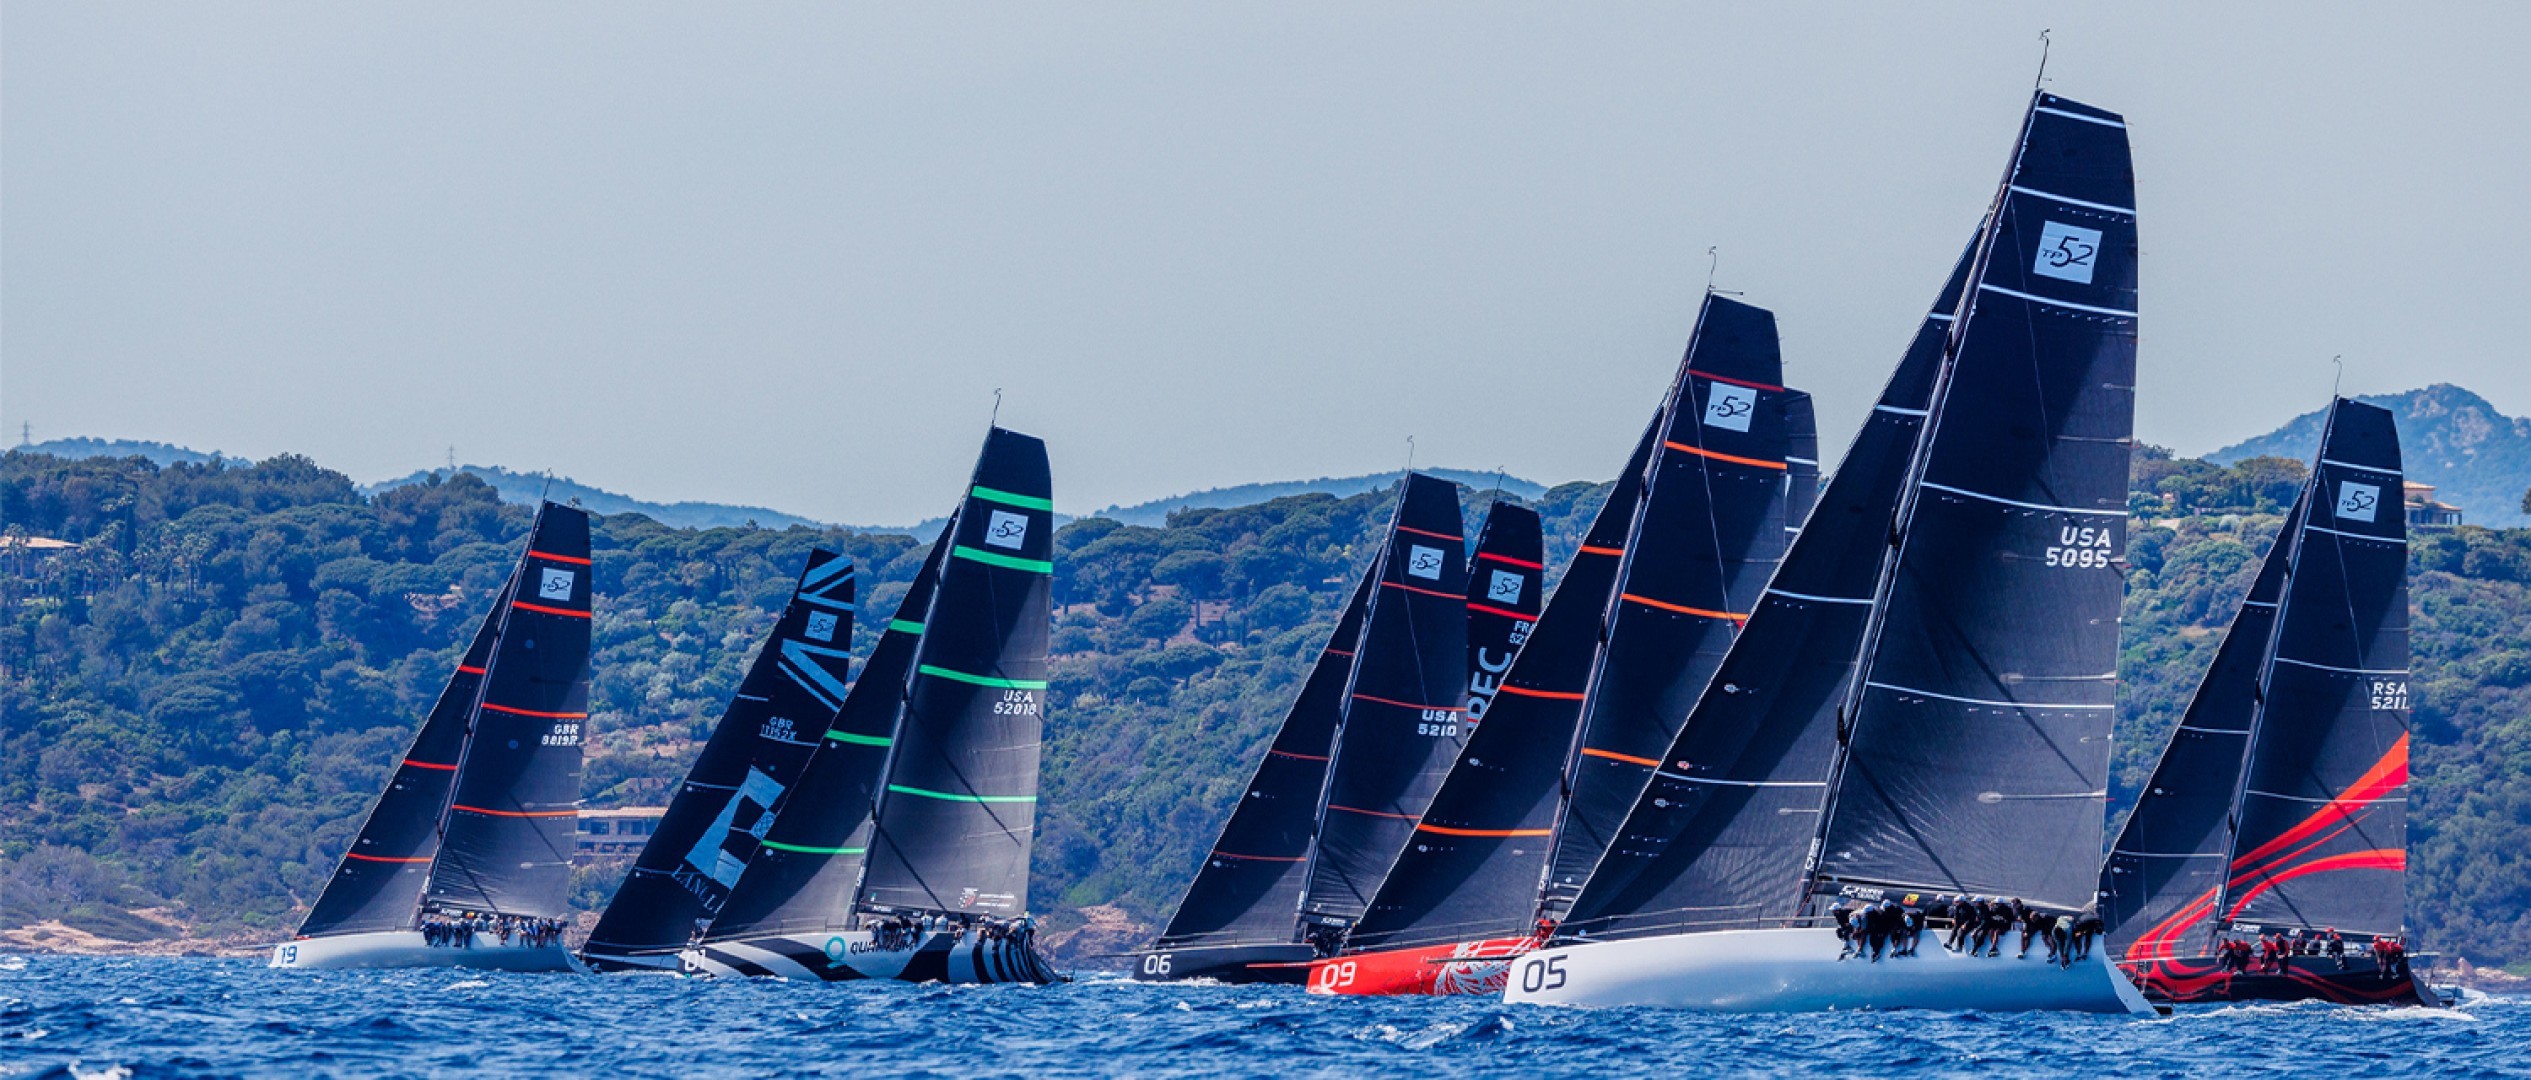 Provezza on top after champagne racing day on the Gulf of Saint-Tropez